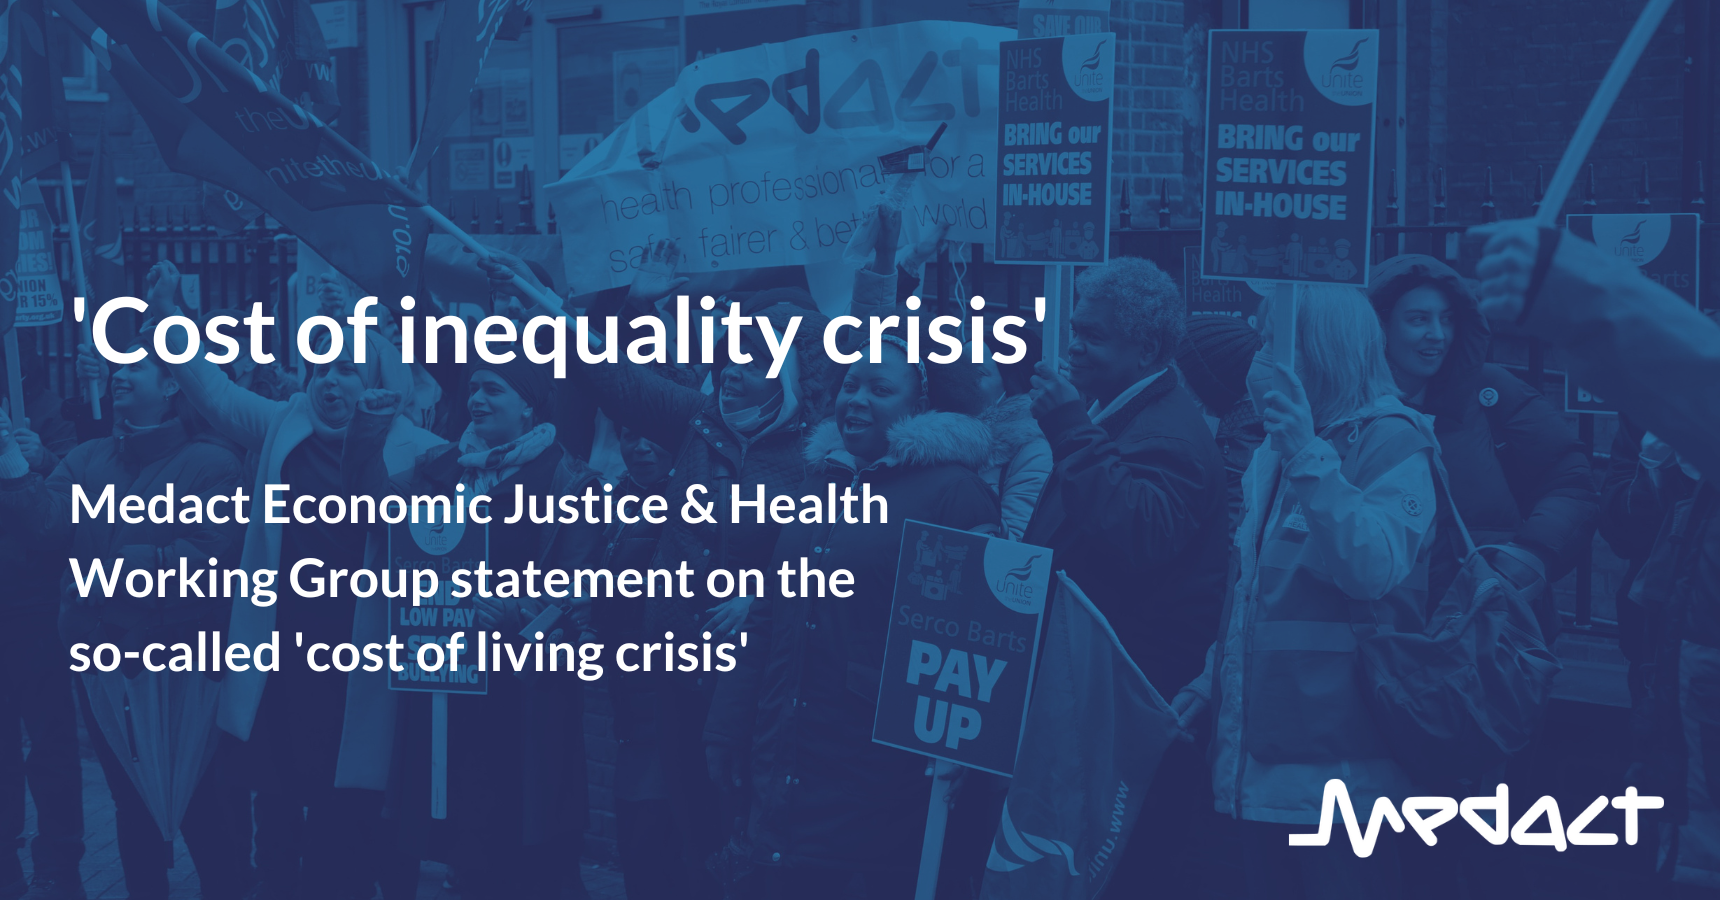 'Cost of inequality crisis' – Medact Economic Justice & Health Working Group statement on the so-called 'cost of living crisis'